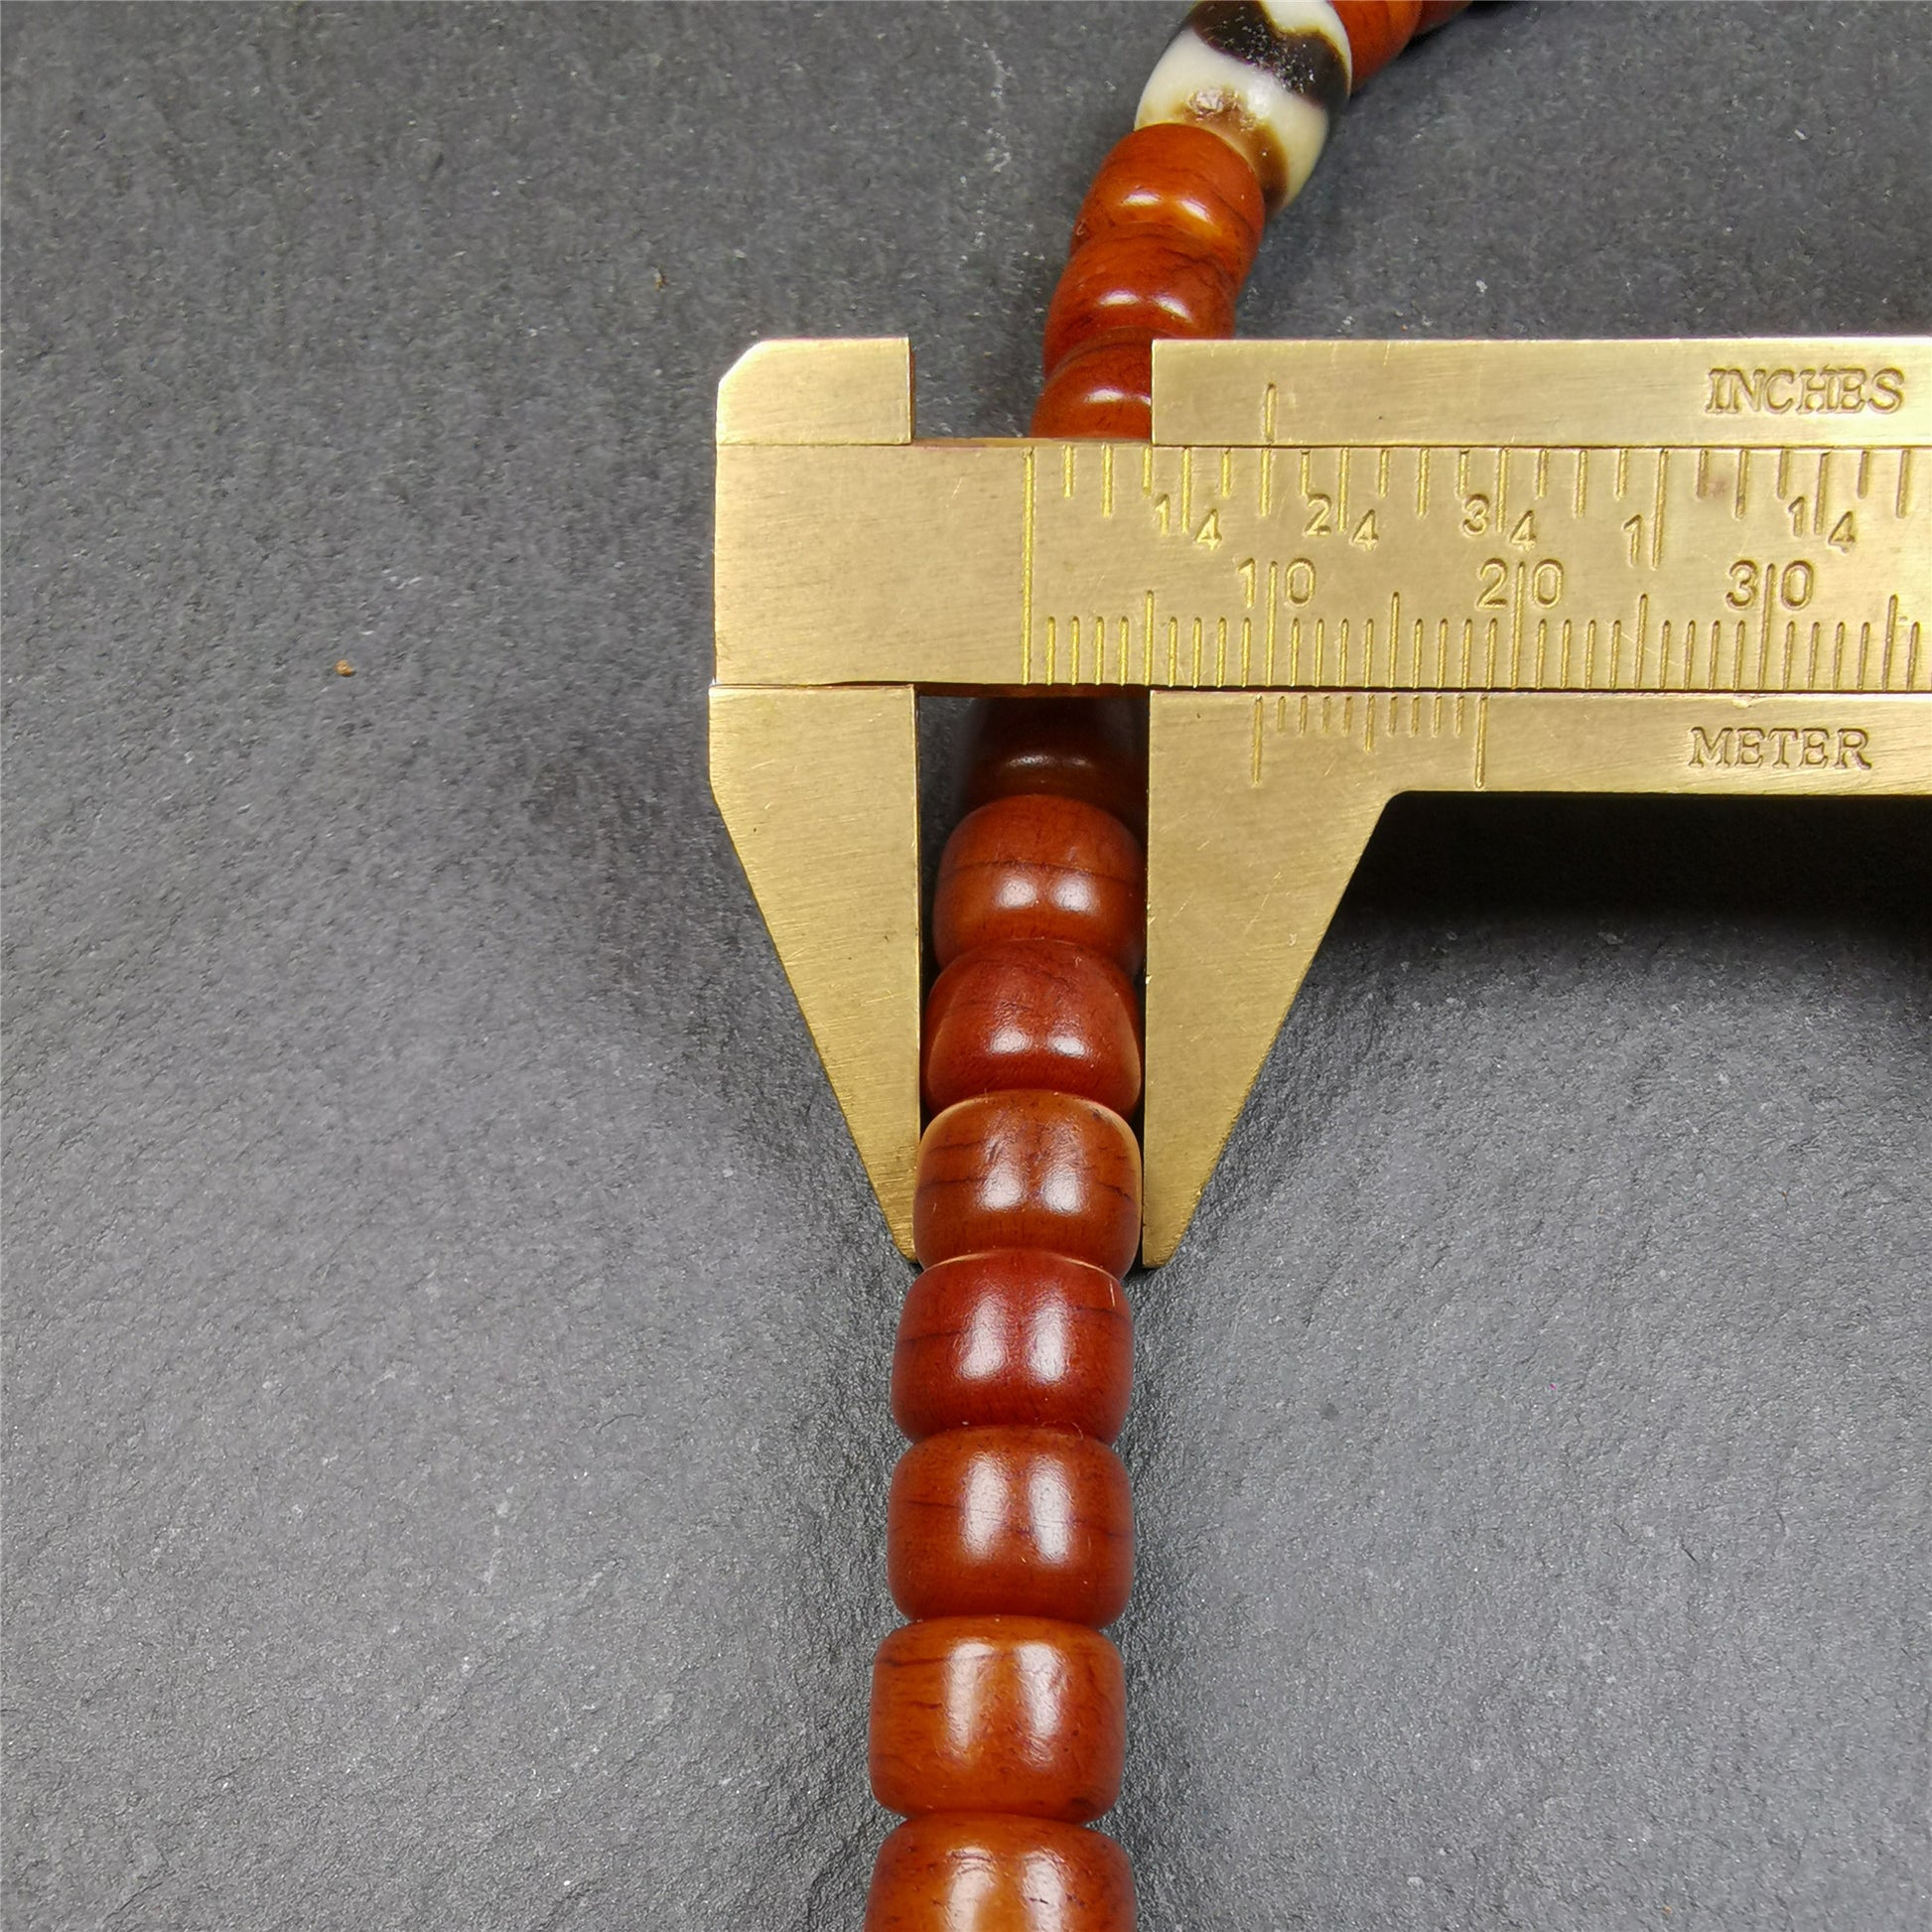 This mala was made by Tibetan craftsmen and come from Hepo Town.  It is made of yak bone, brown color,108 dice beads diameter of 10mm,0.4",circumference is 84cm,33",and 3 dzi beads,end of a yak horn guru bead.